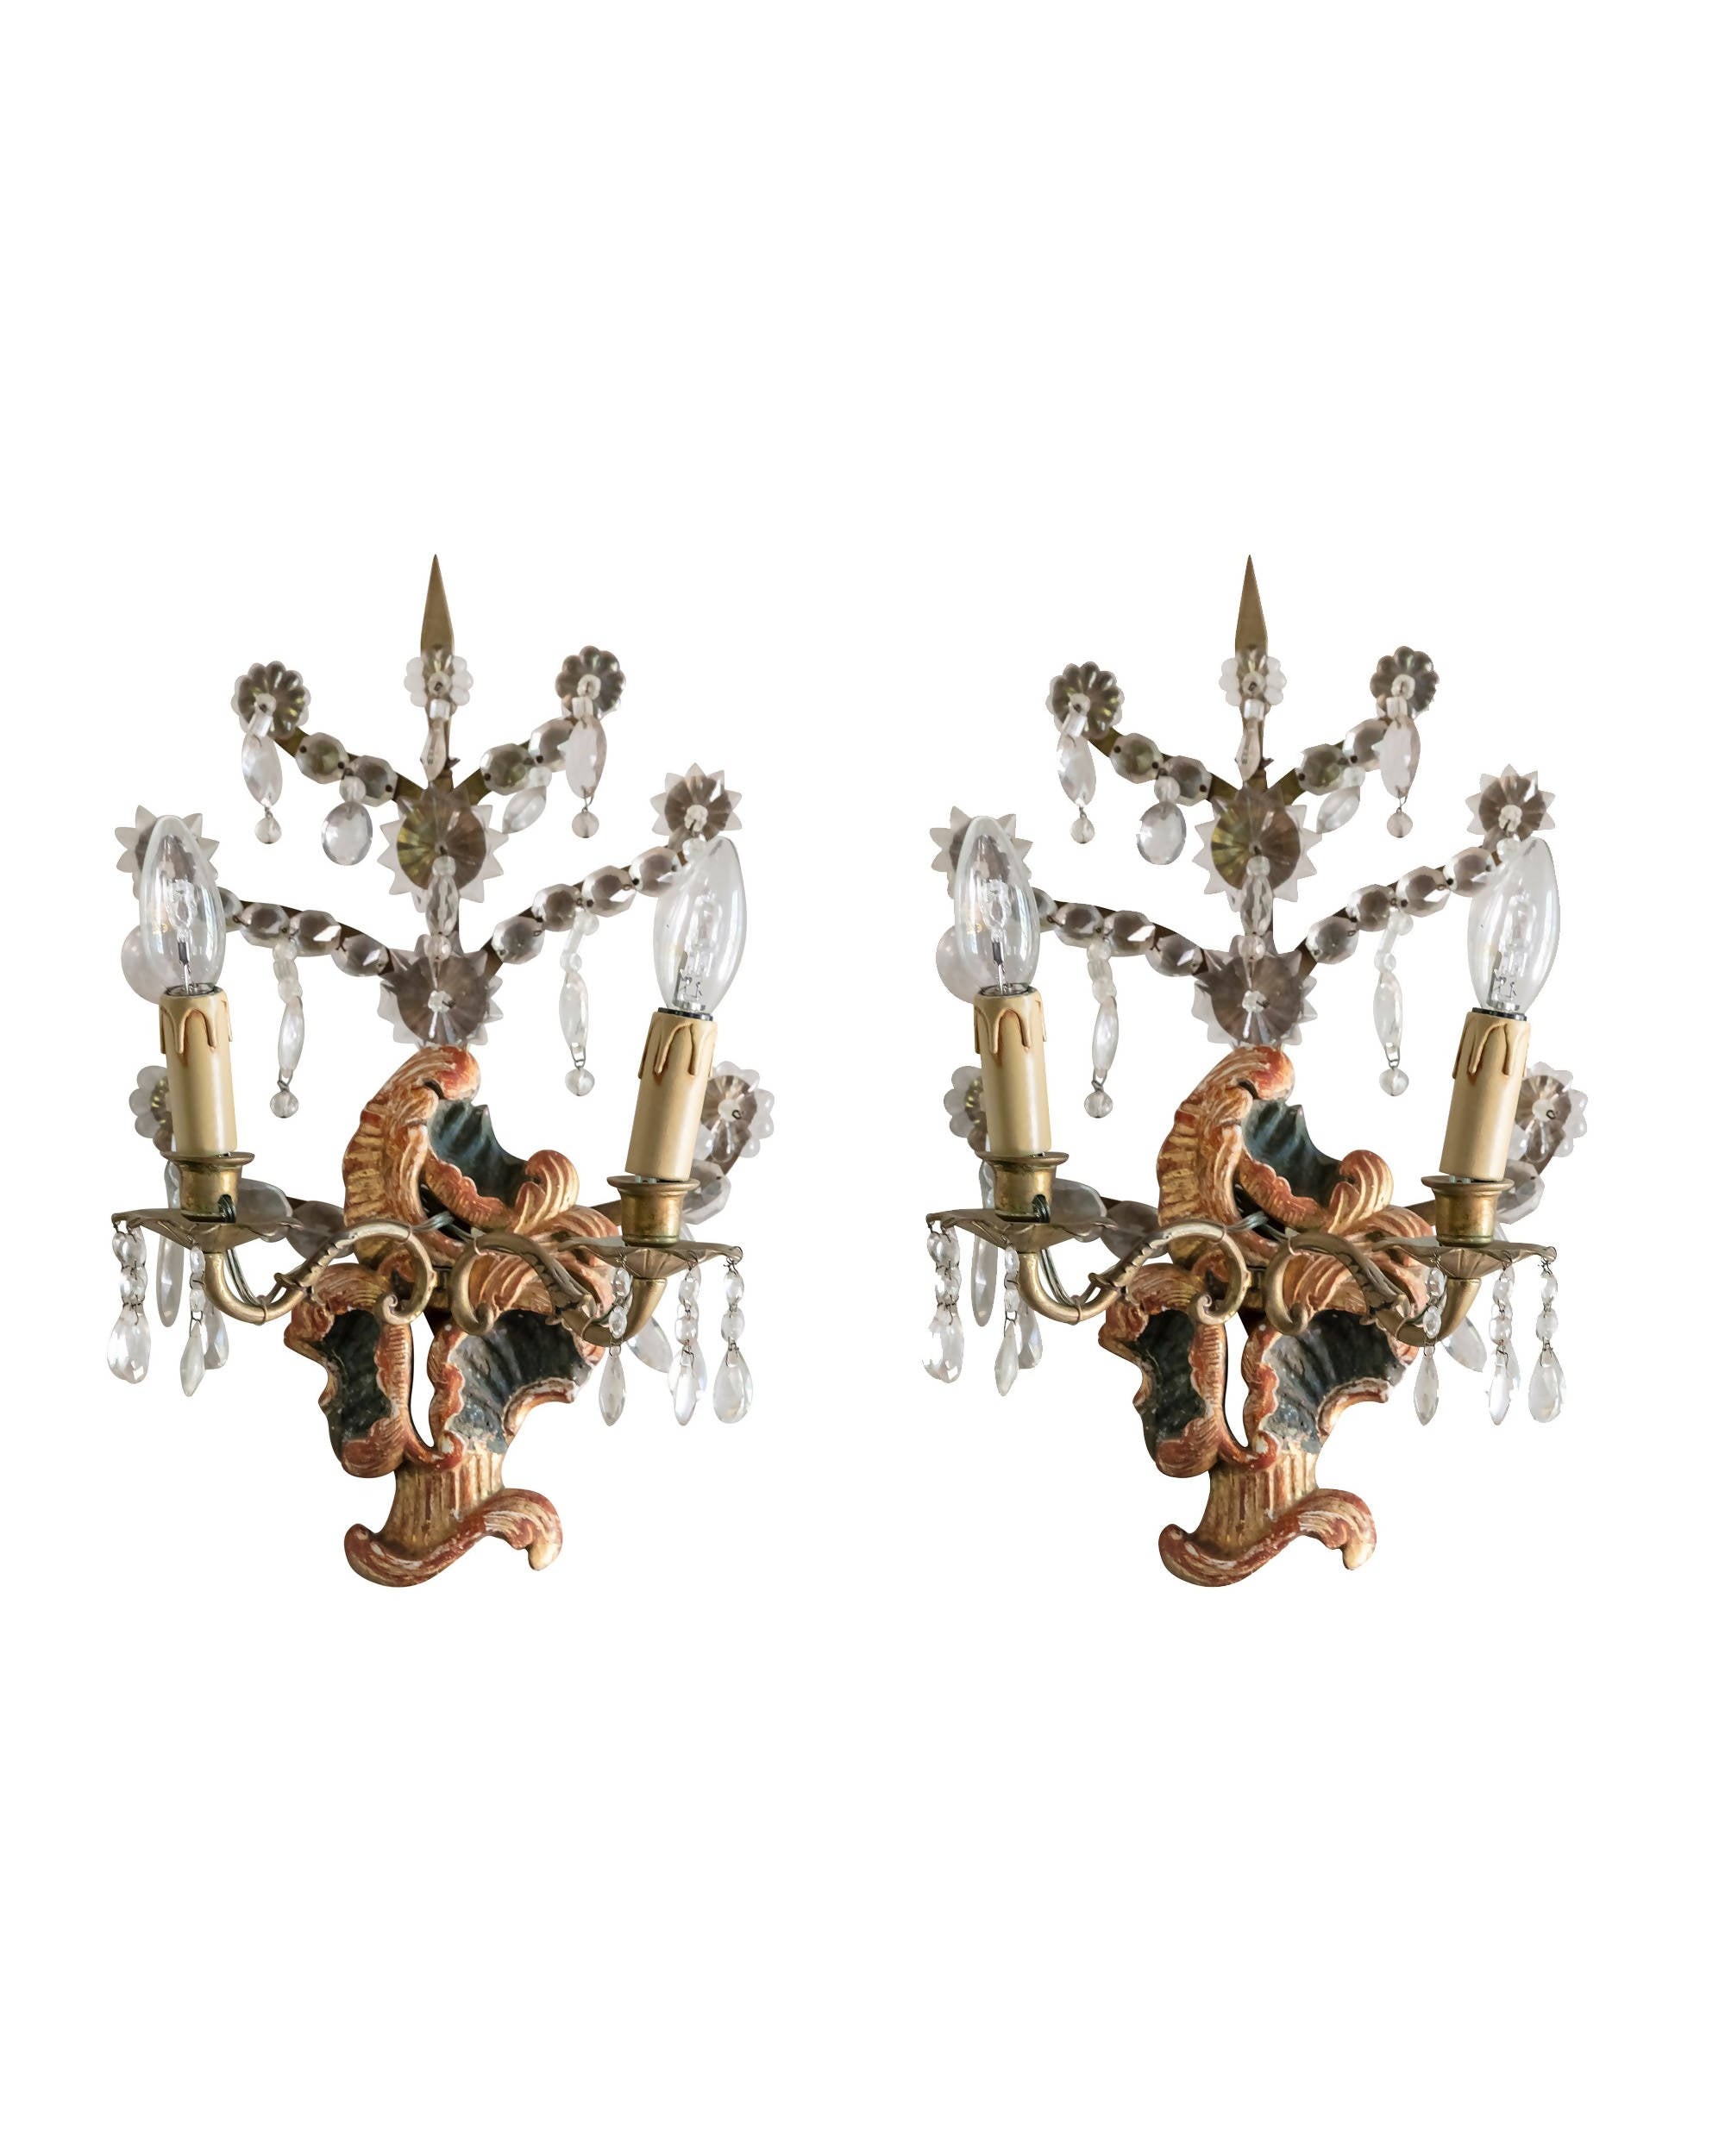 Pair of sconces in polychrome wood and crystals. Italy. XVIIIth century